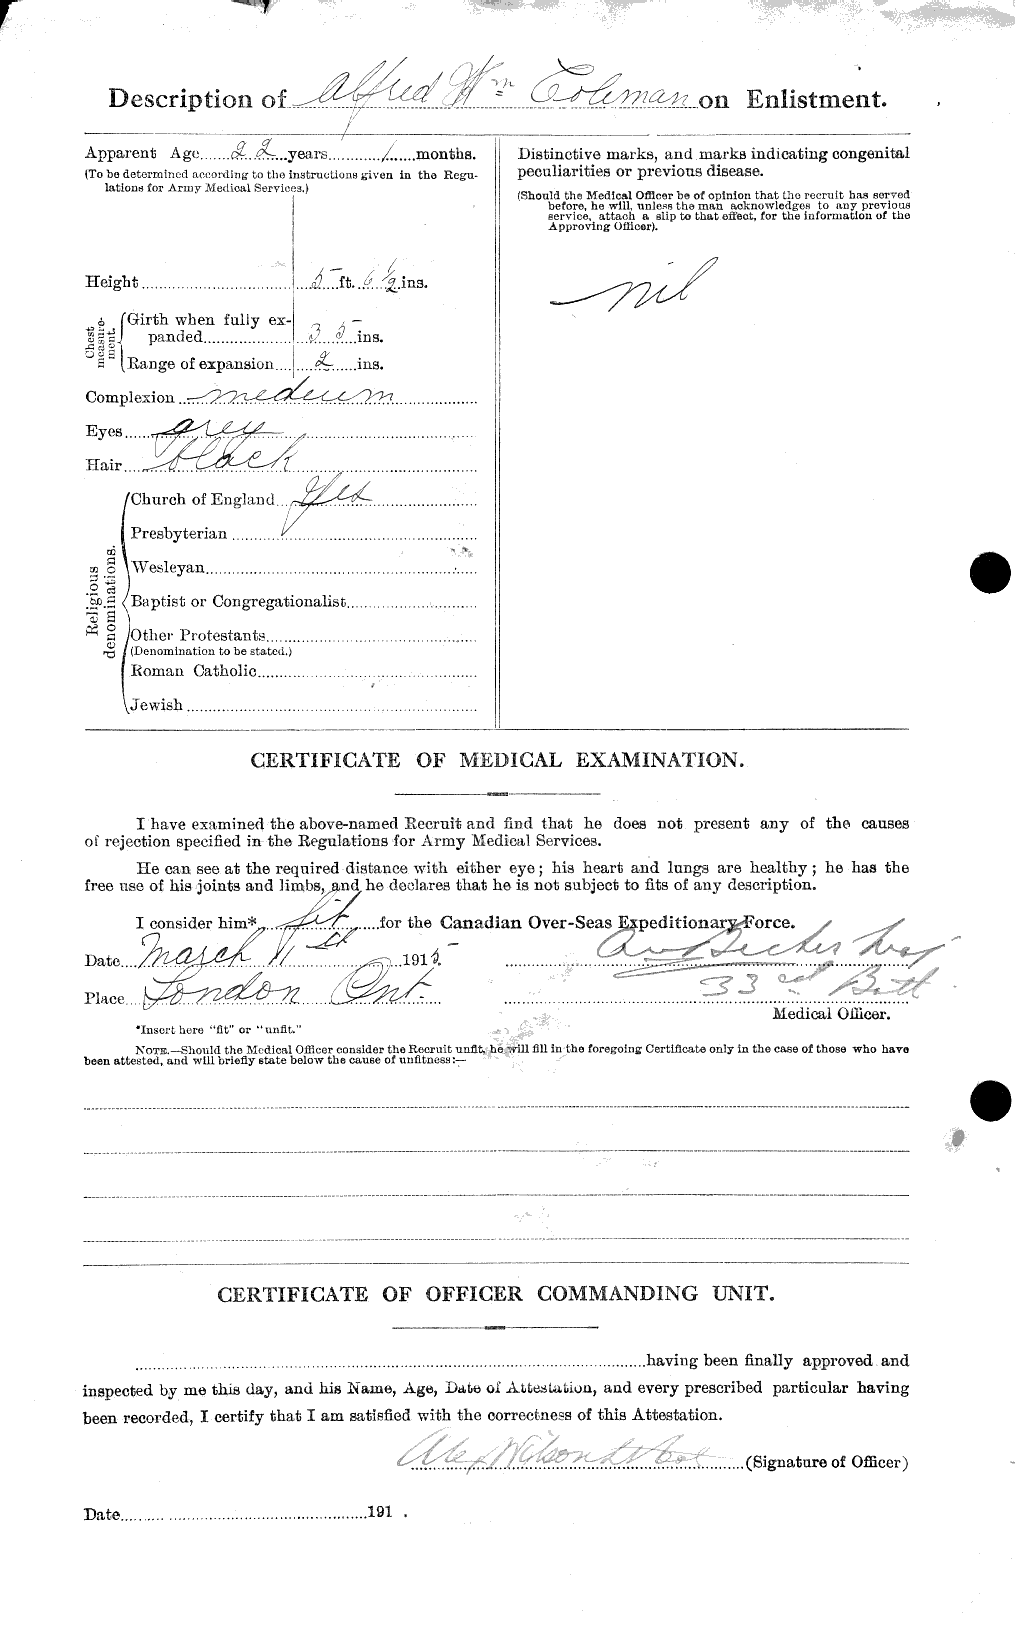 Personnel Records of the First World War - CEF 028056b